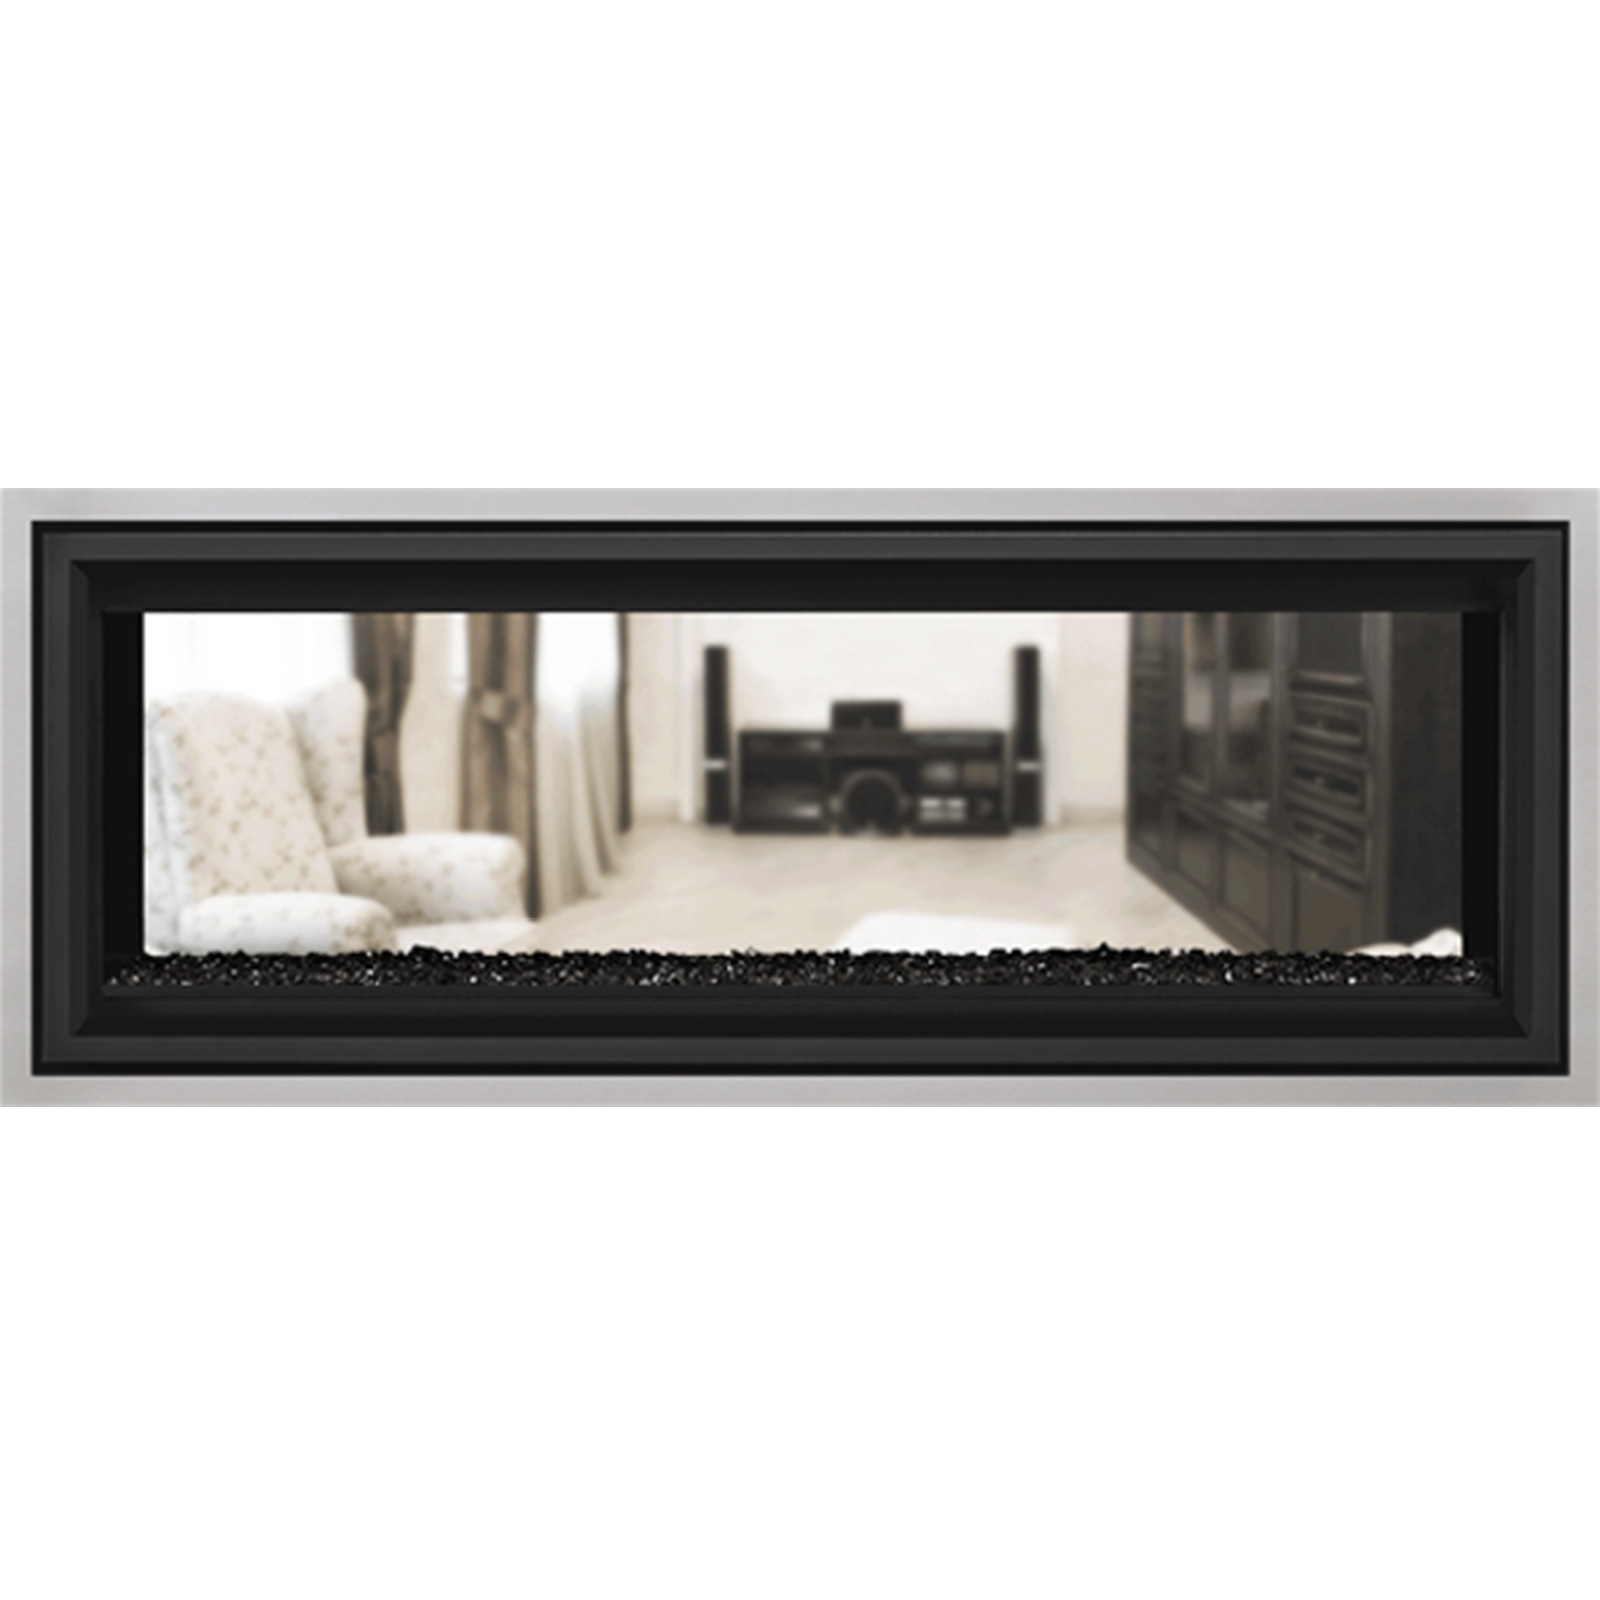 Napoleon Vector 50 SeeThru Linear Direct-Vent Gas Fireplace | LV50N2-2